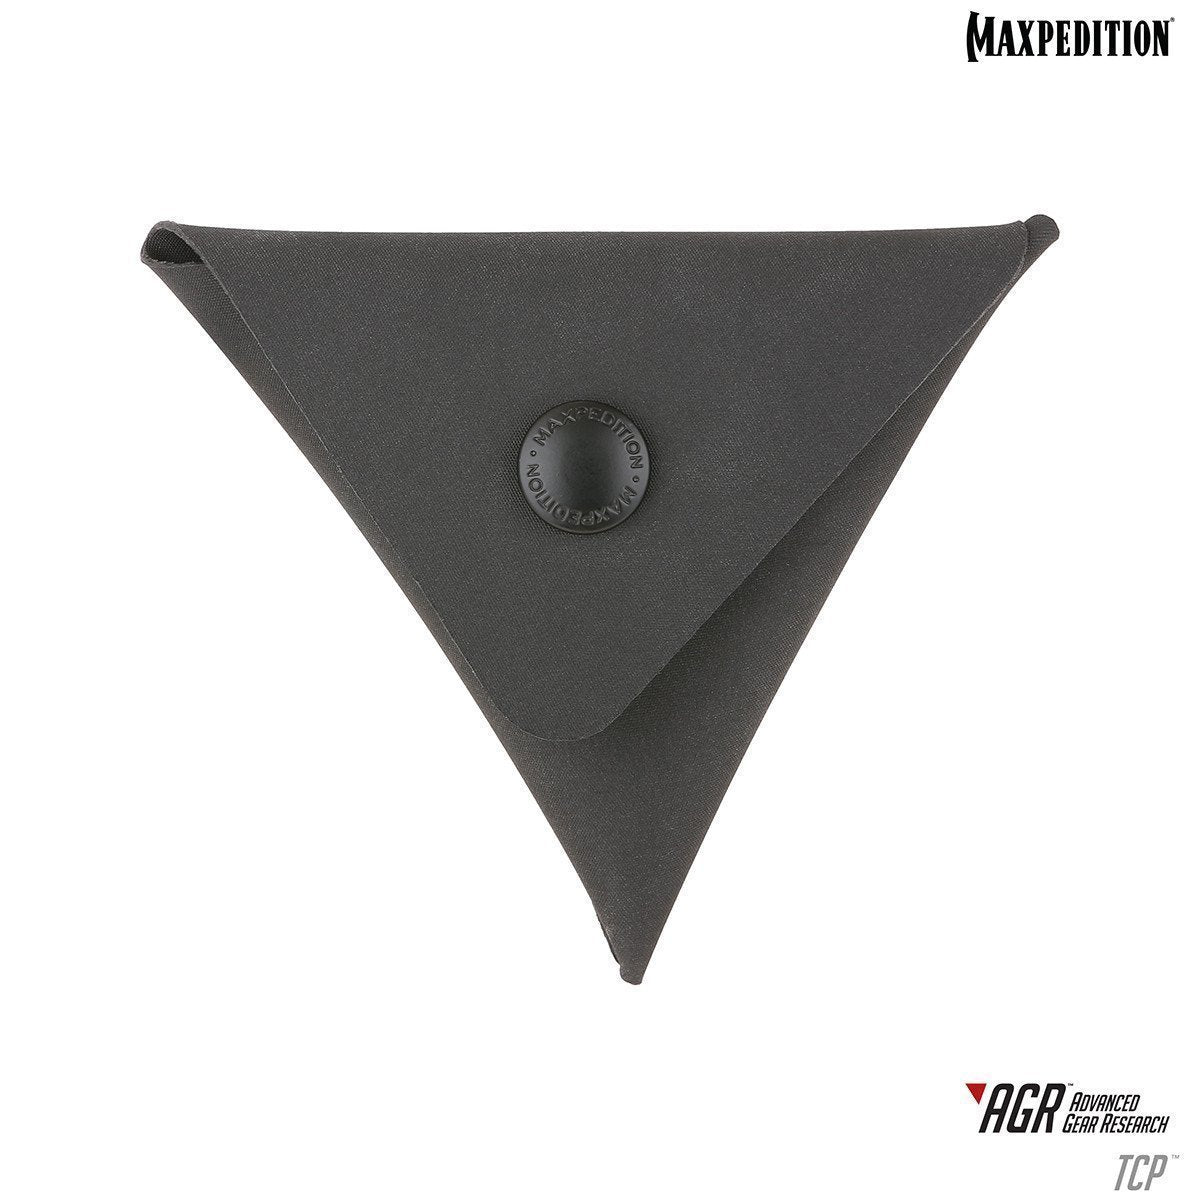 Maxpedition TCP Triangle Coin Pouch Black Tactical Distributors Ltd New Zealand